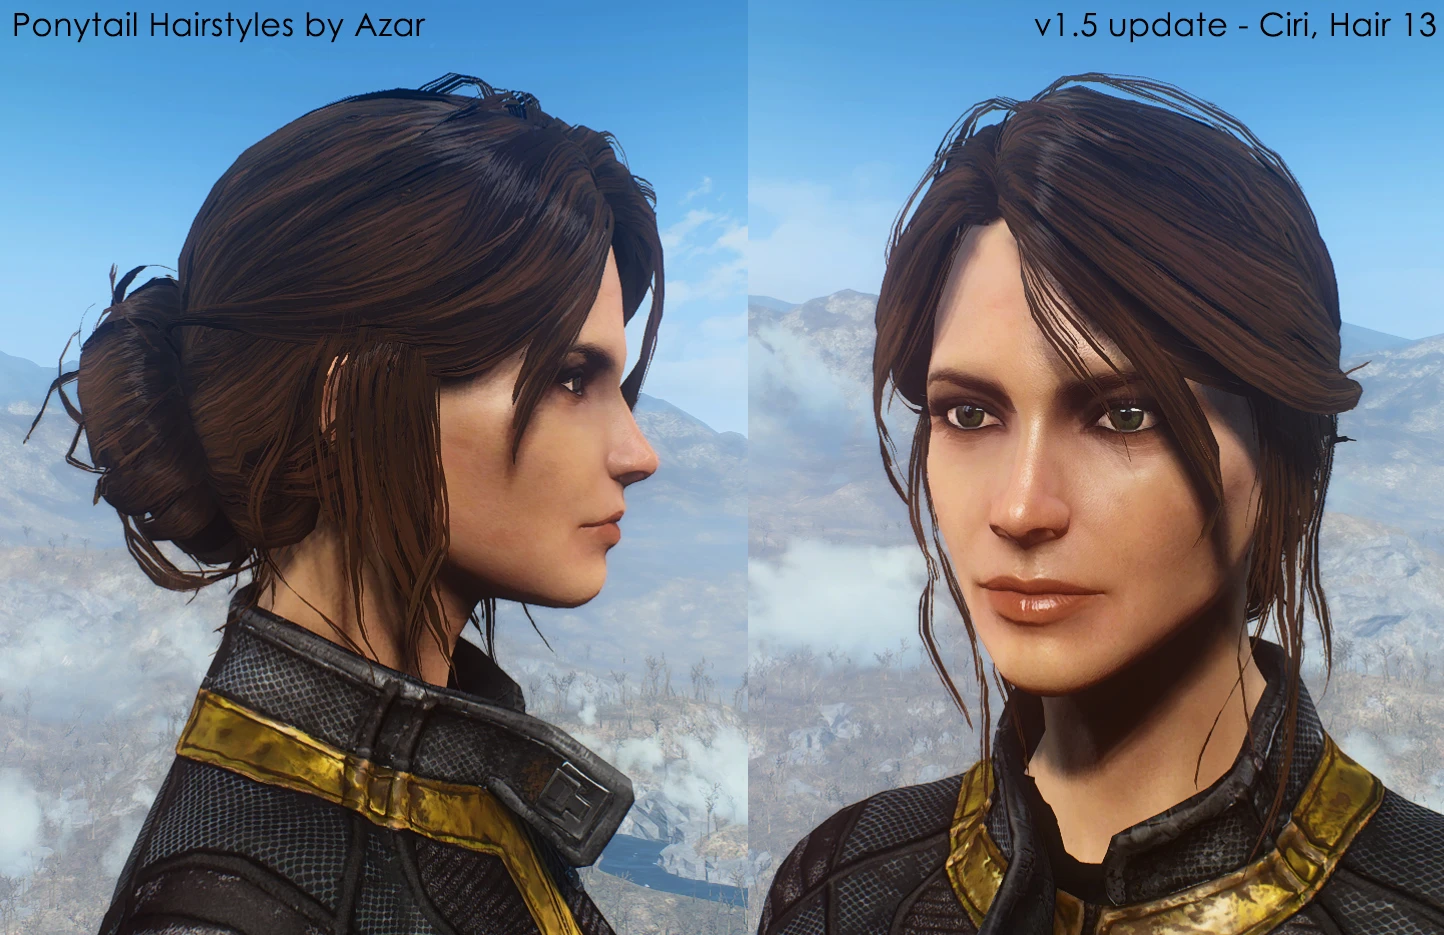 Ponytail Hairstyles by Azar v2 5a ITA at Fallout 4 Nexus Mods. 